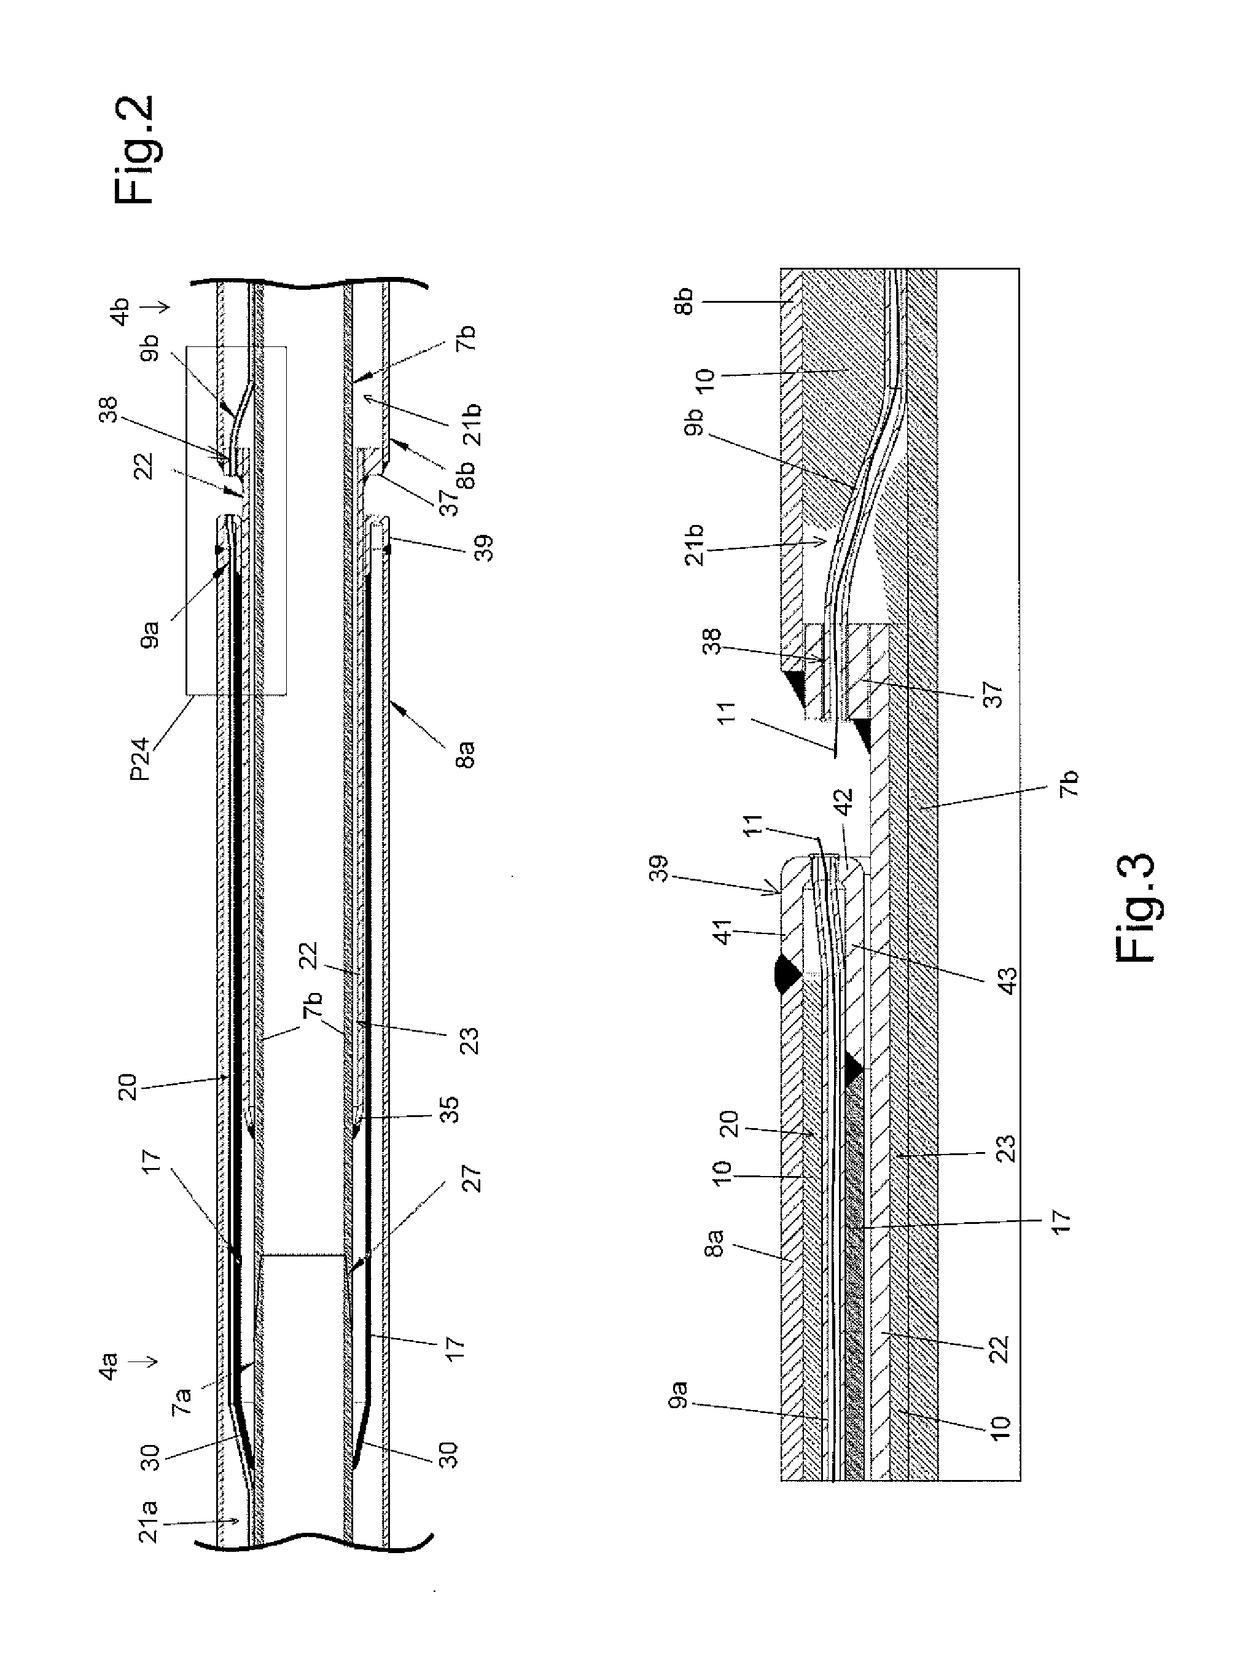 Thermally insulated and heated double-walled pipe segment for fitting by screw fastening, and a method of implementing such a pipe segment